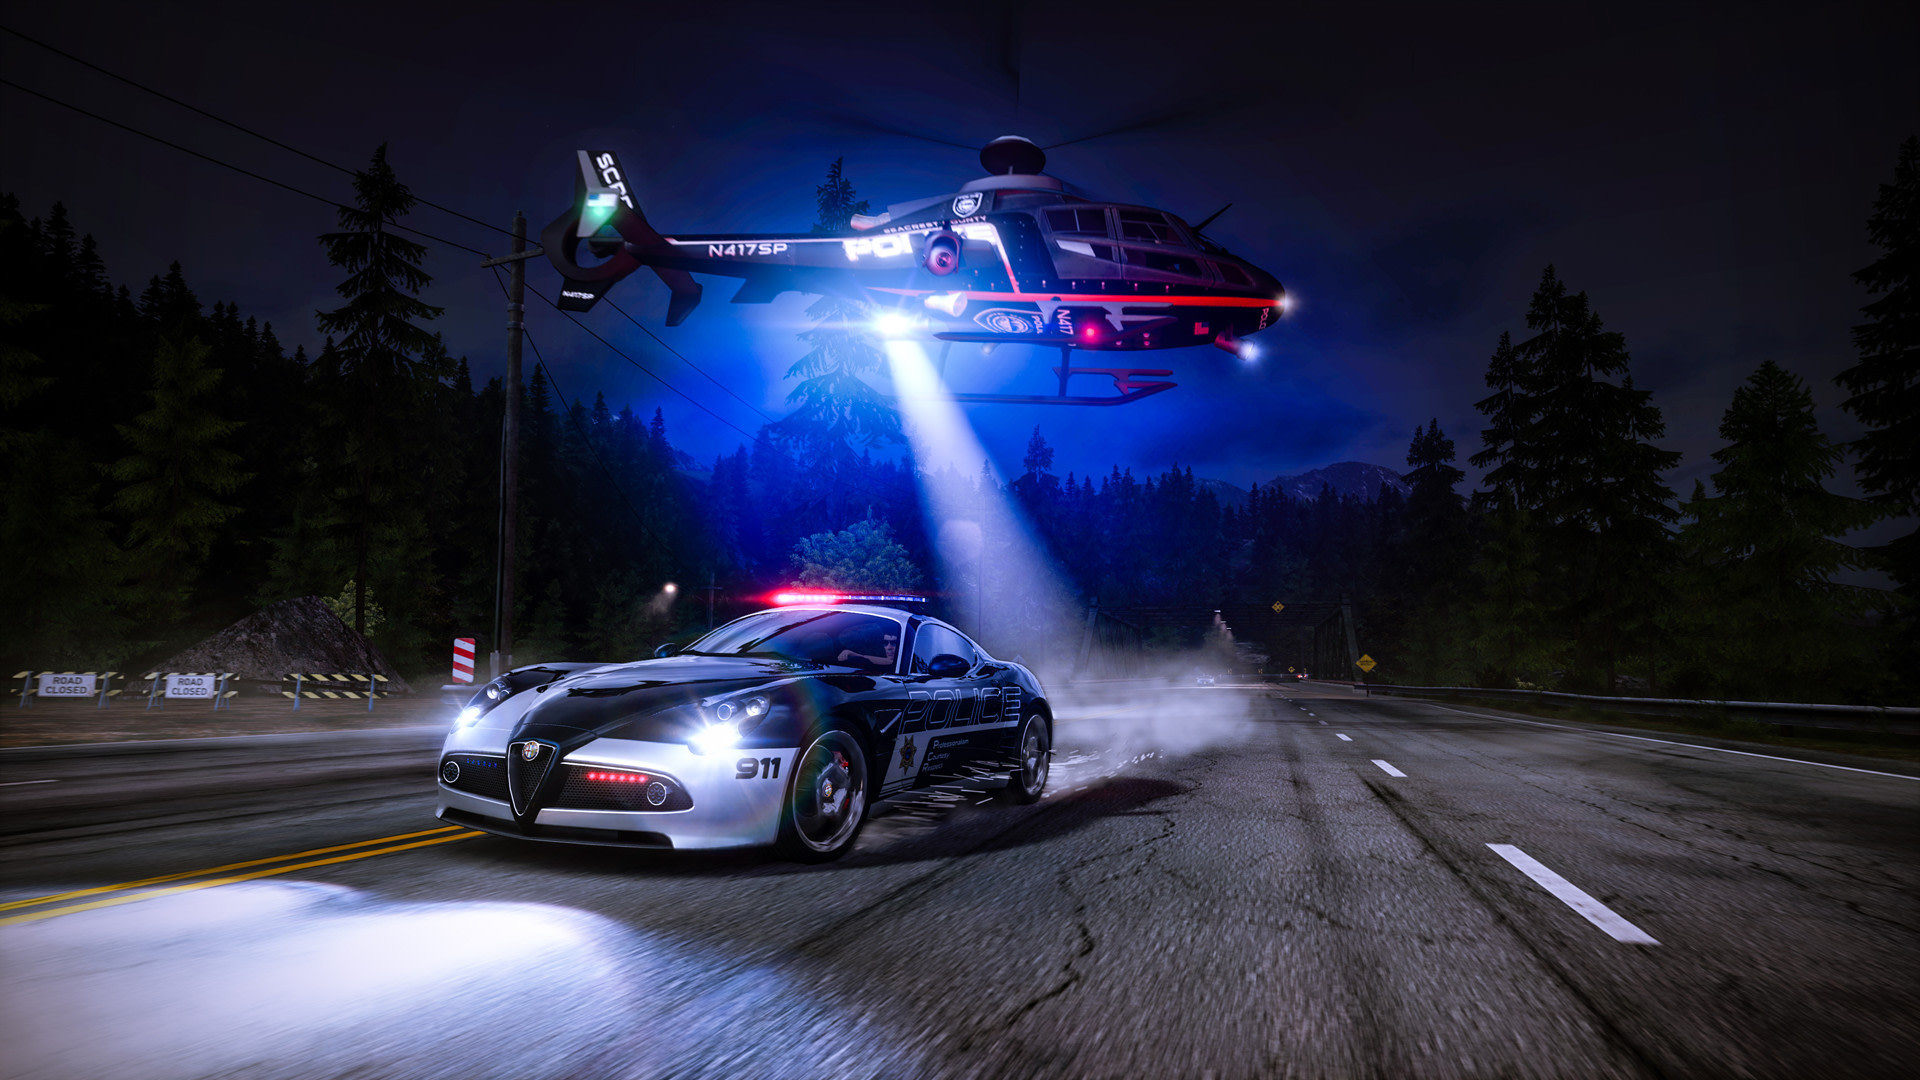 Need For Speed Need For Speed Hot Pursuit Racing Drift Cars Car Video Games PC Gaming Vehicle 1920x1080